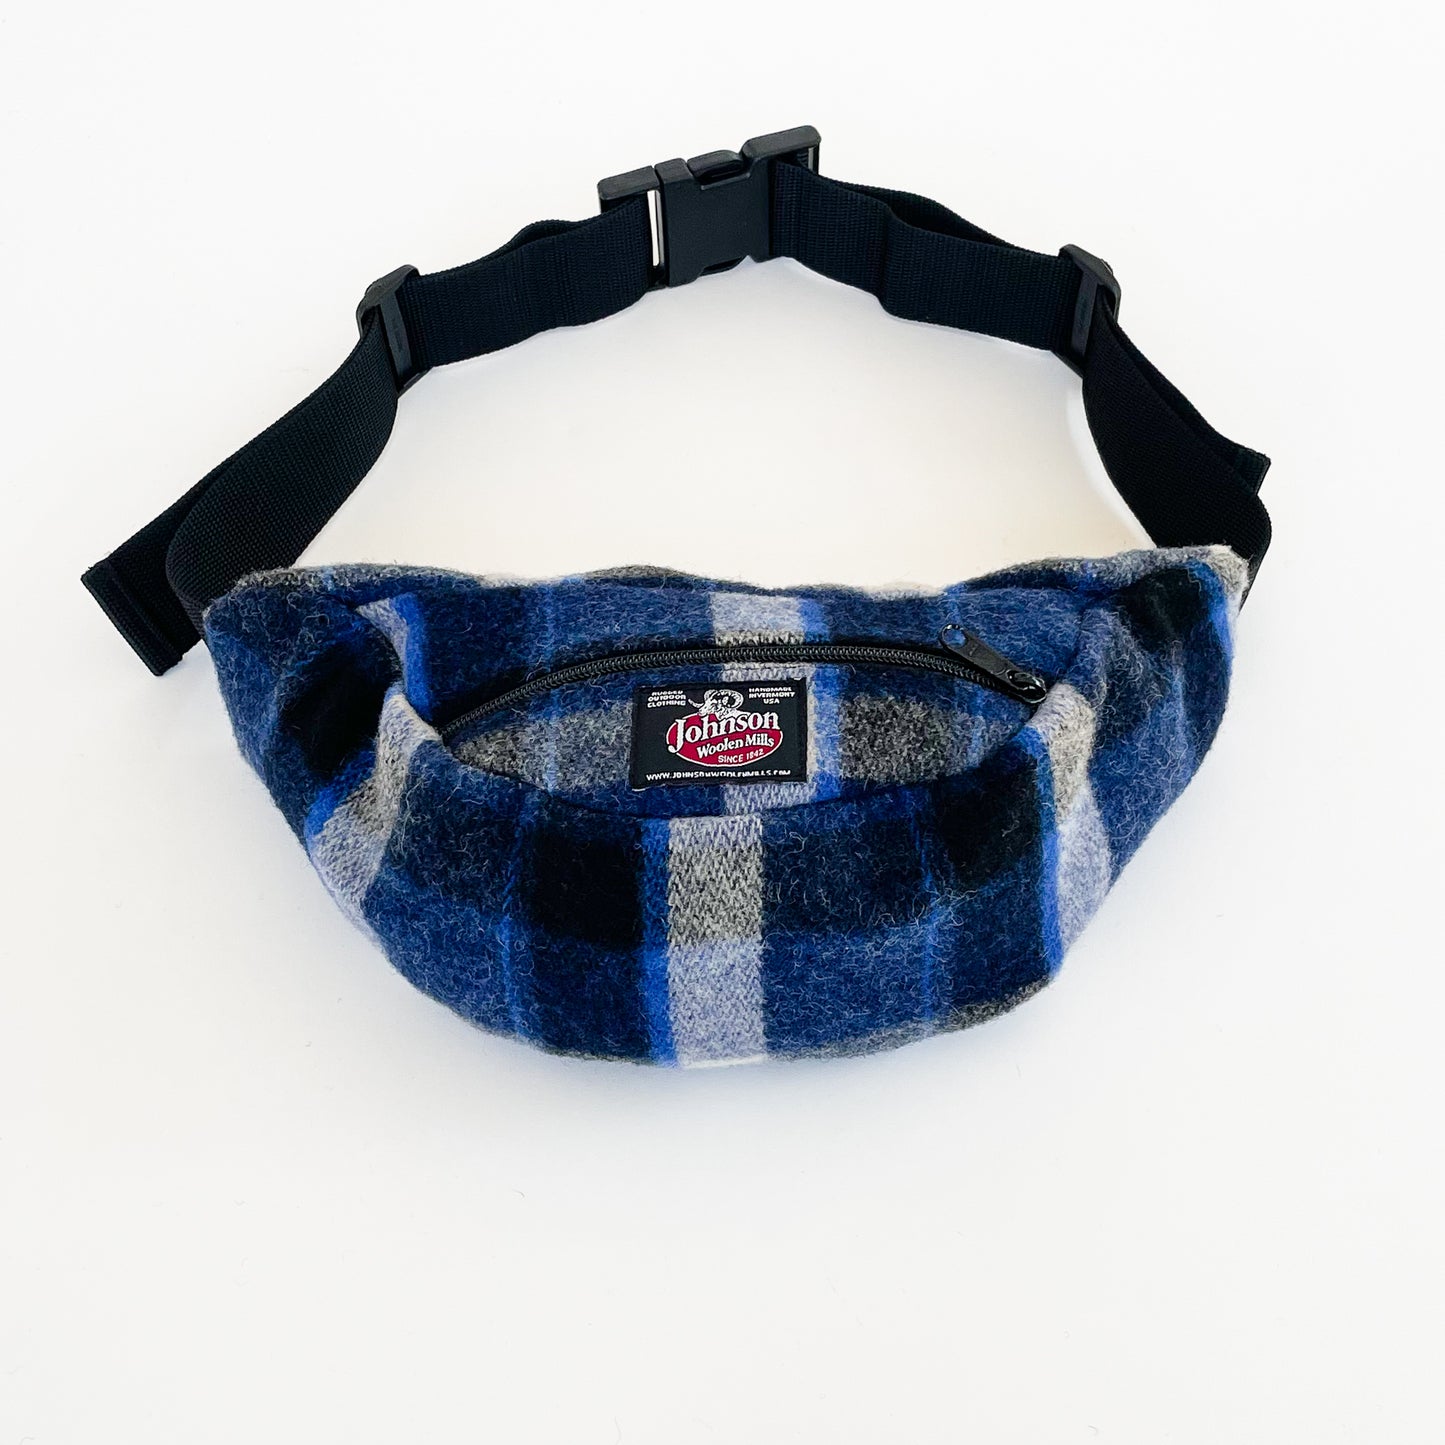 Johnson Woolen Mills Oversized Fanny Pack Jay Blue Blue Navy Cream bottom and  front view with belt